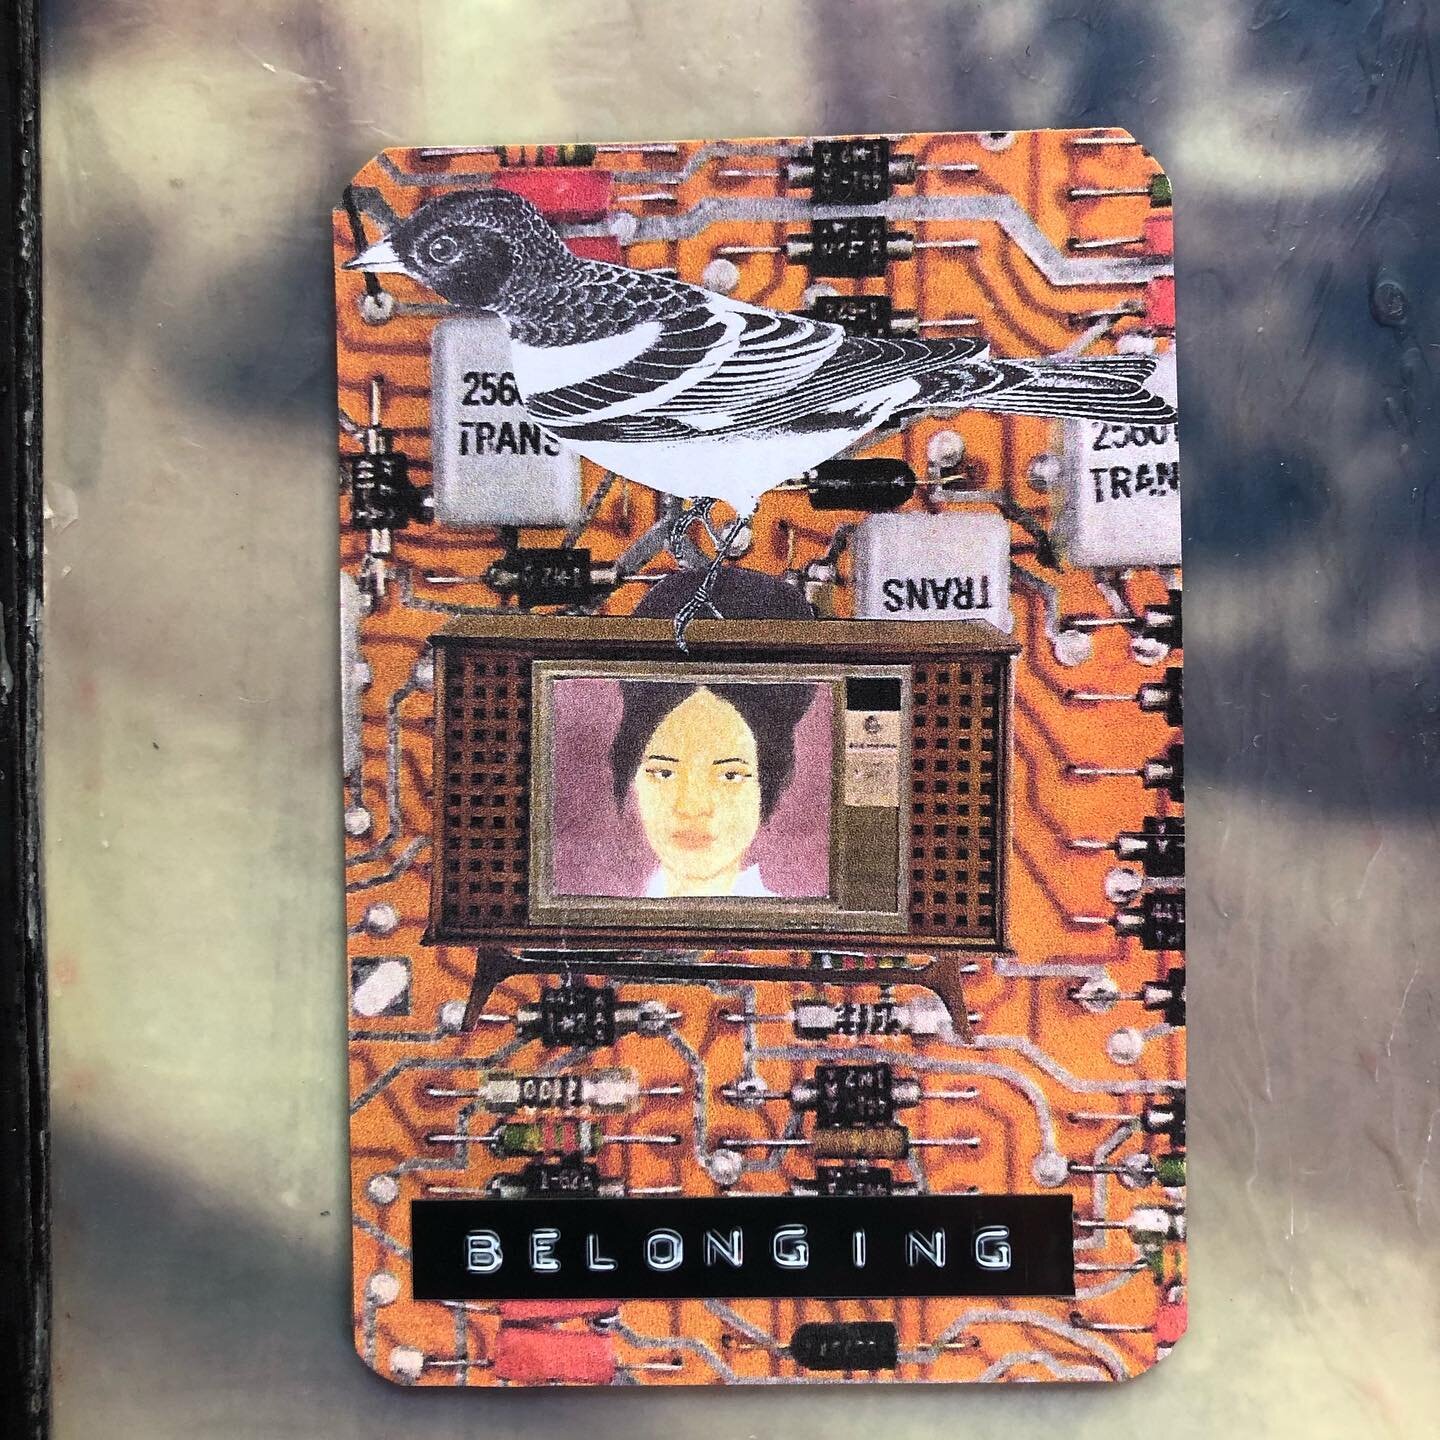 Belonging. Pondering this word prompt for #inneralchemycards2021 When I begin to examine the word itself I suddenly realize that when taken apart it becomes &ldquo;be longing.&rdquo; We all long to belong, and yet we are often longing for things outs